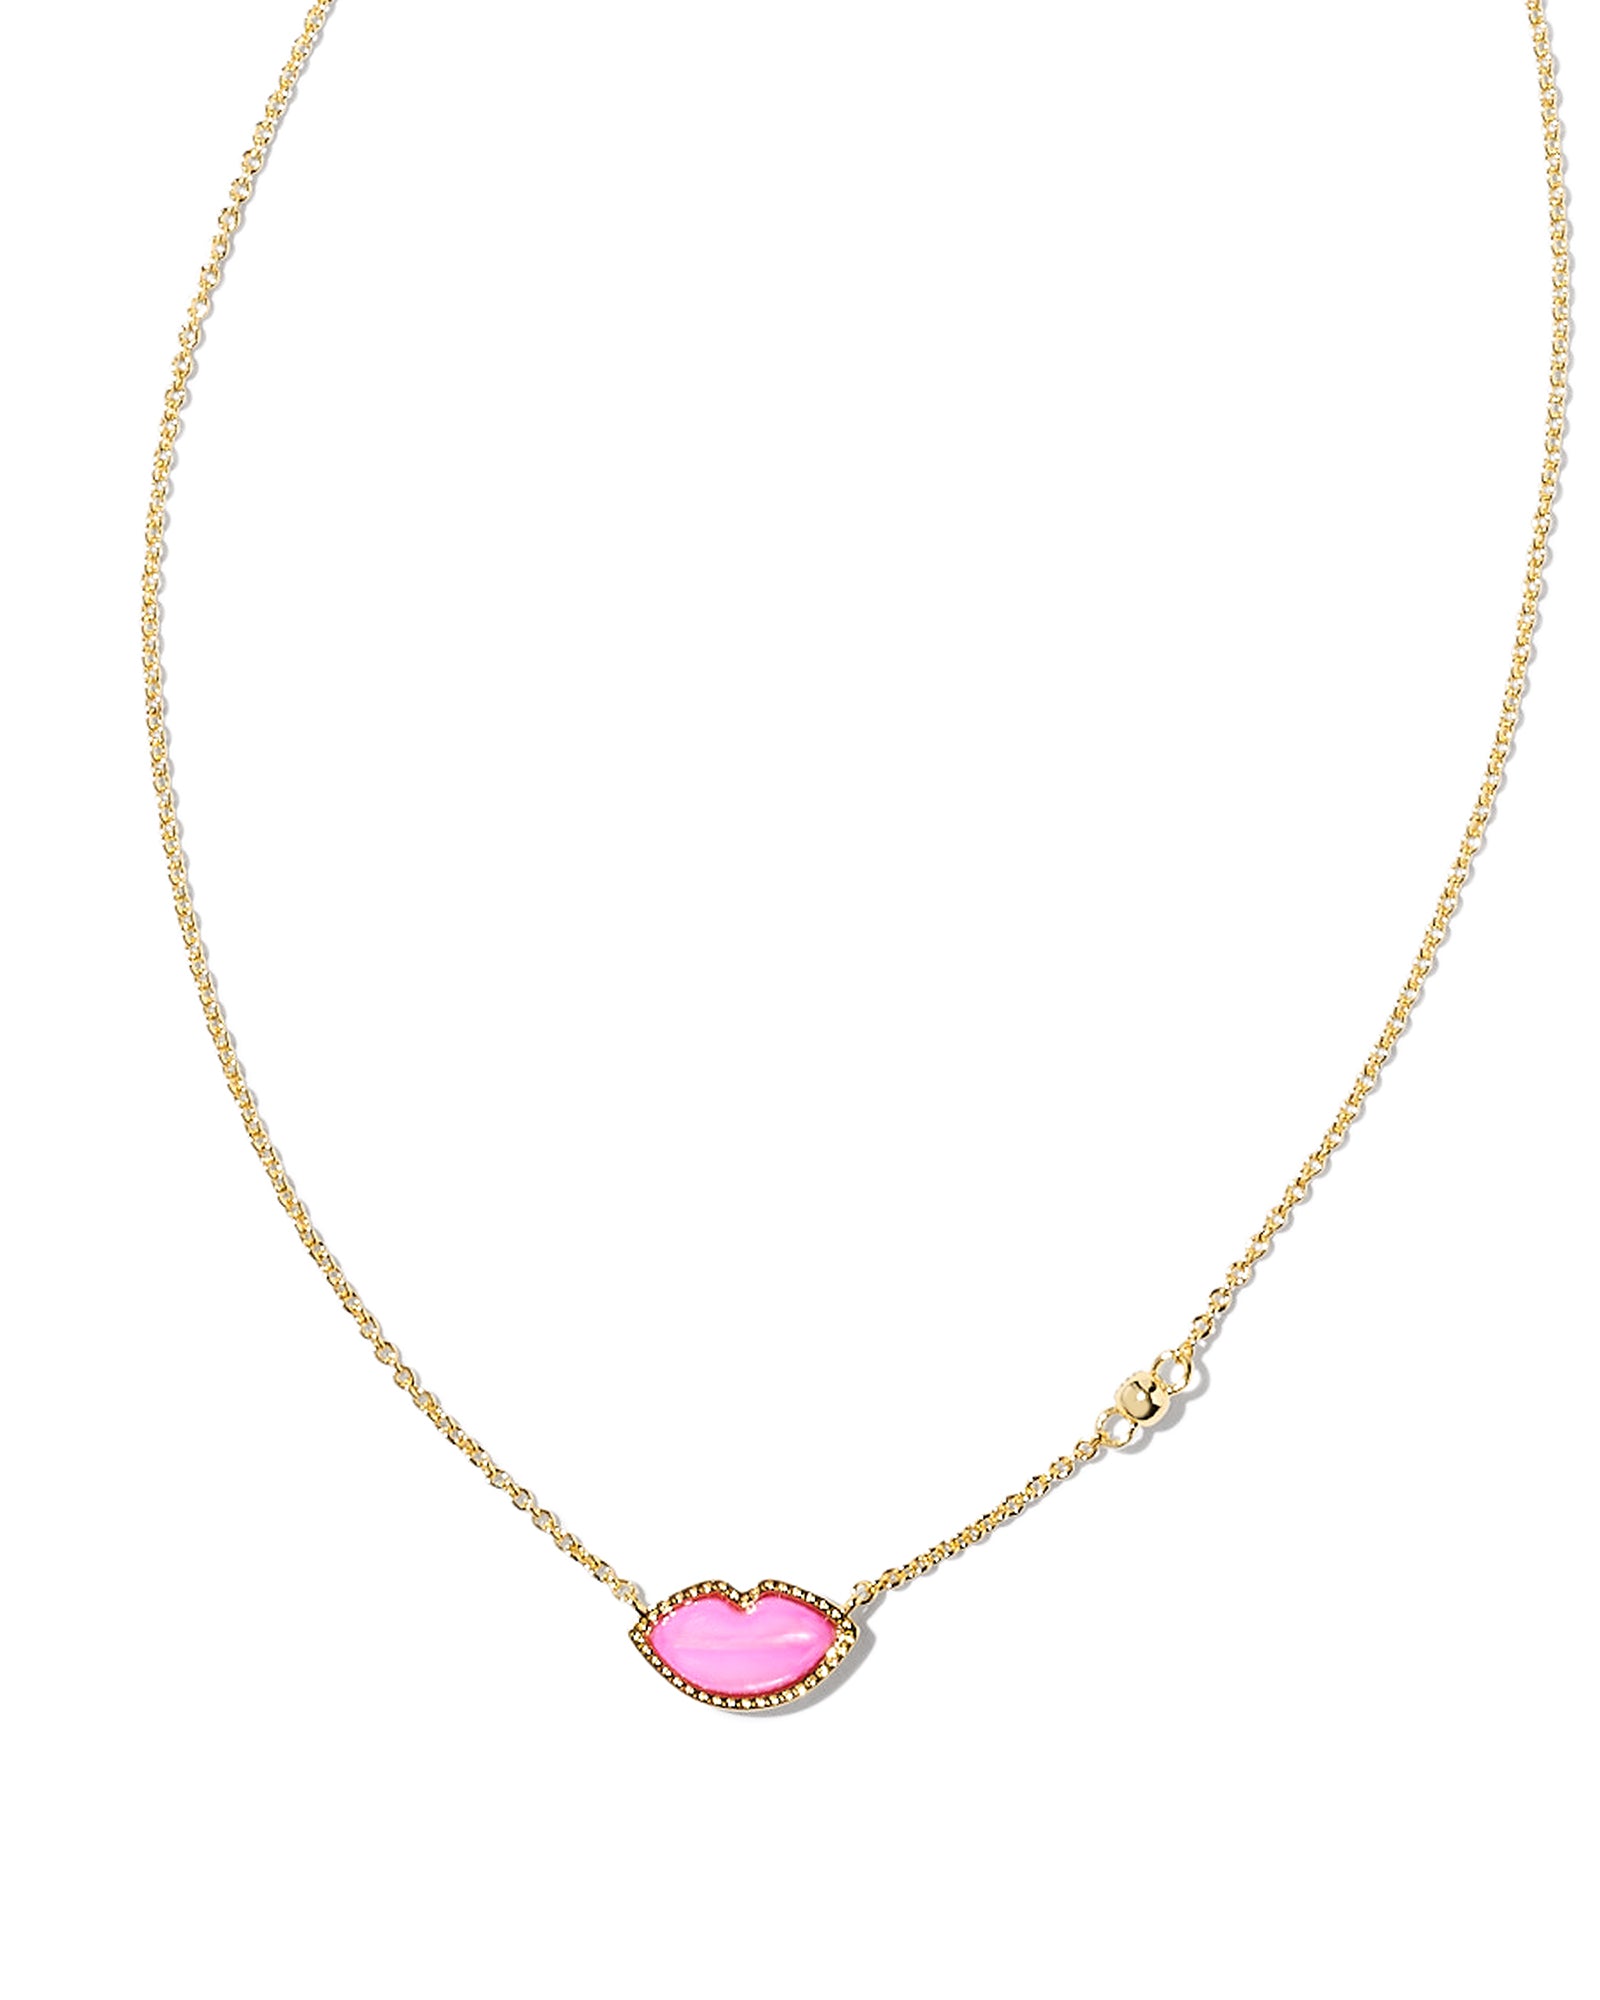 Kendra Scott Lips Pendant Necklace in Hot Pink Mother of Pearl and Gold Plated